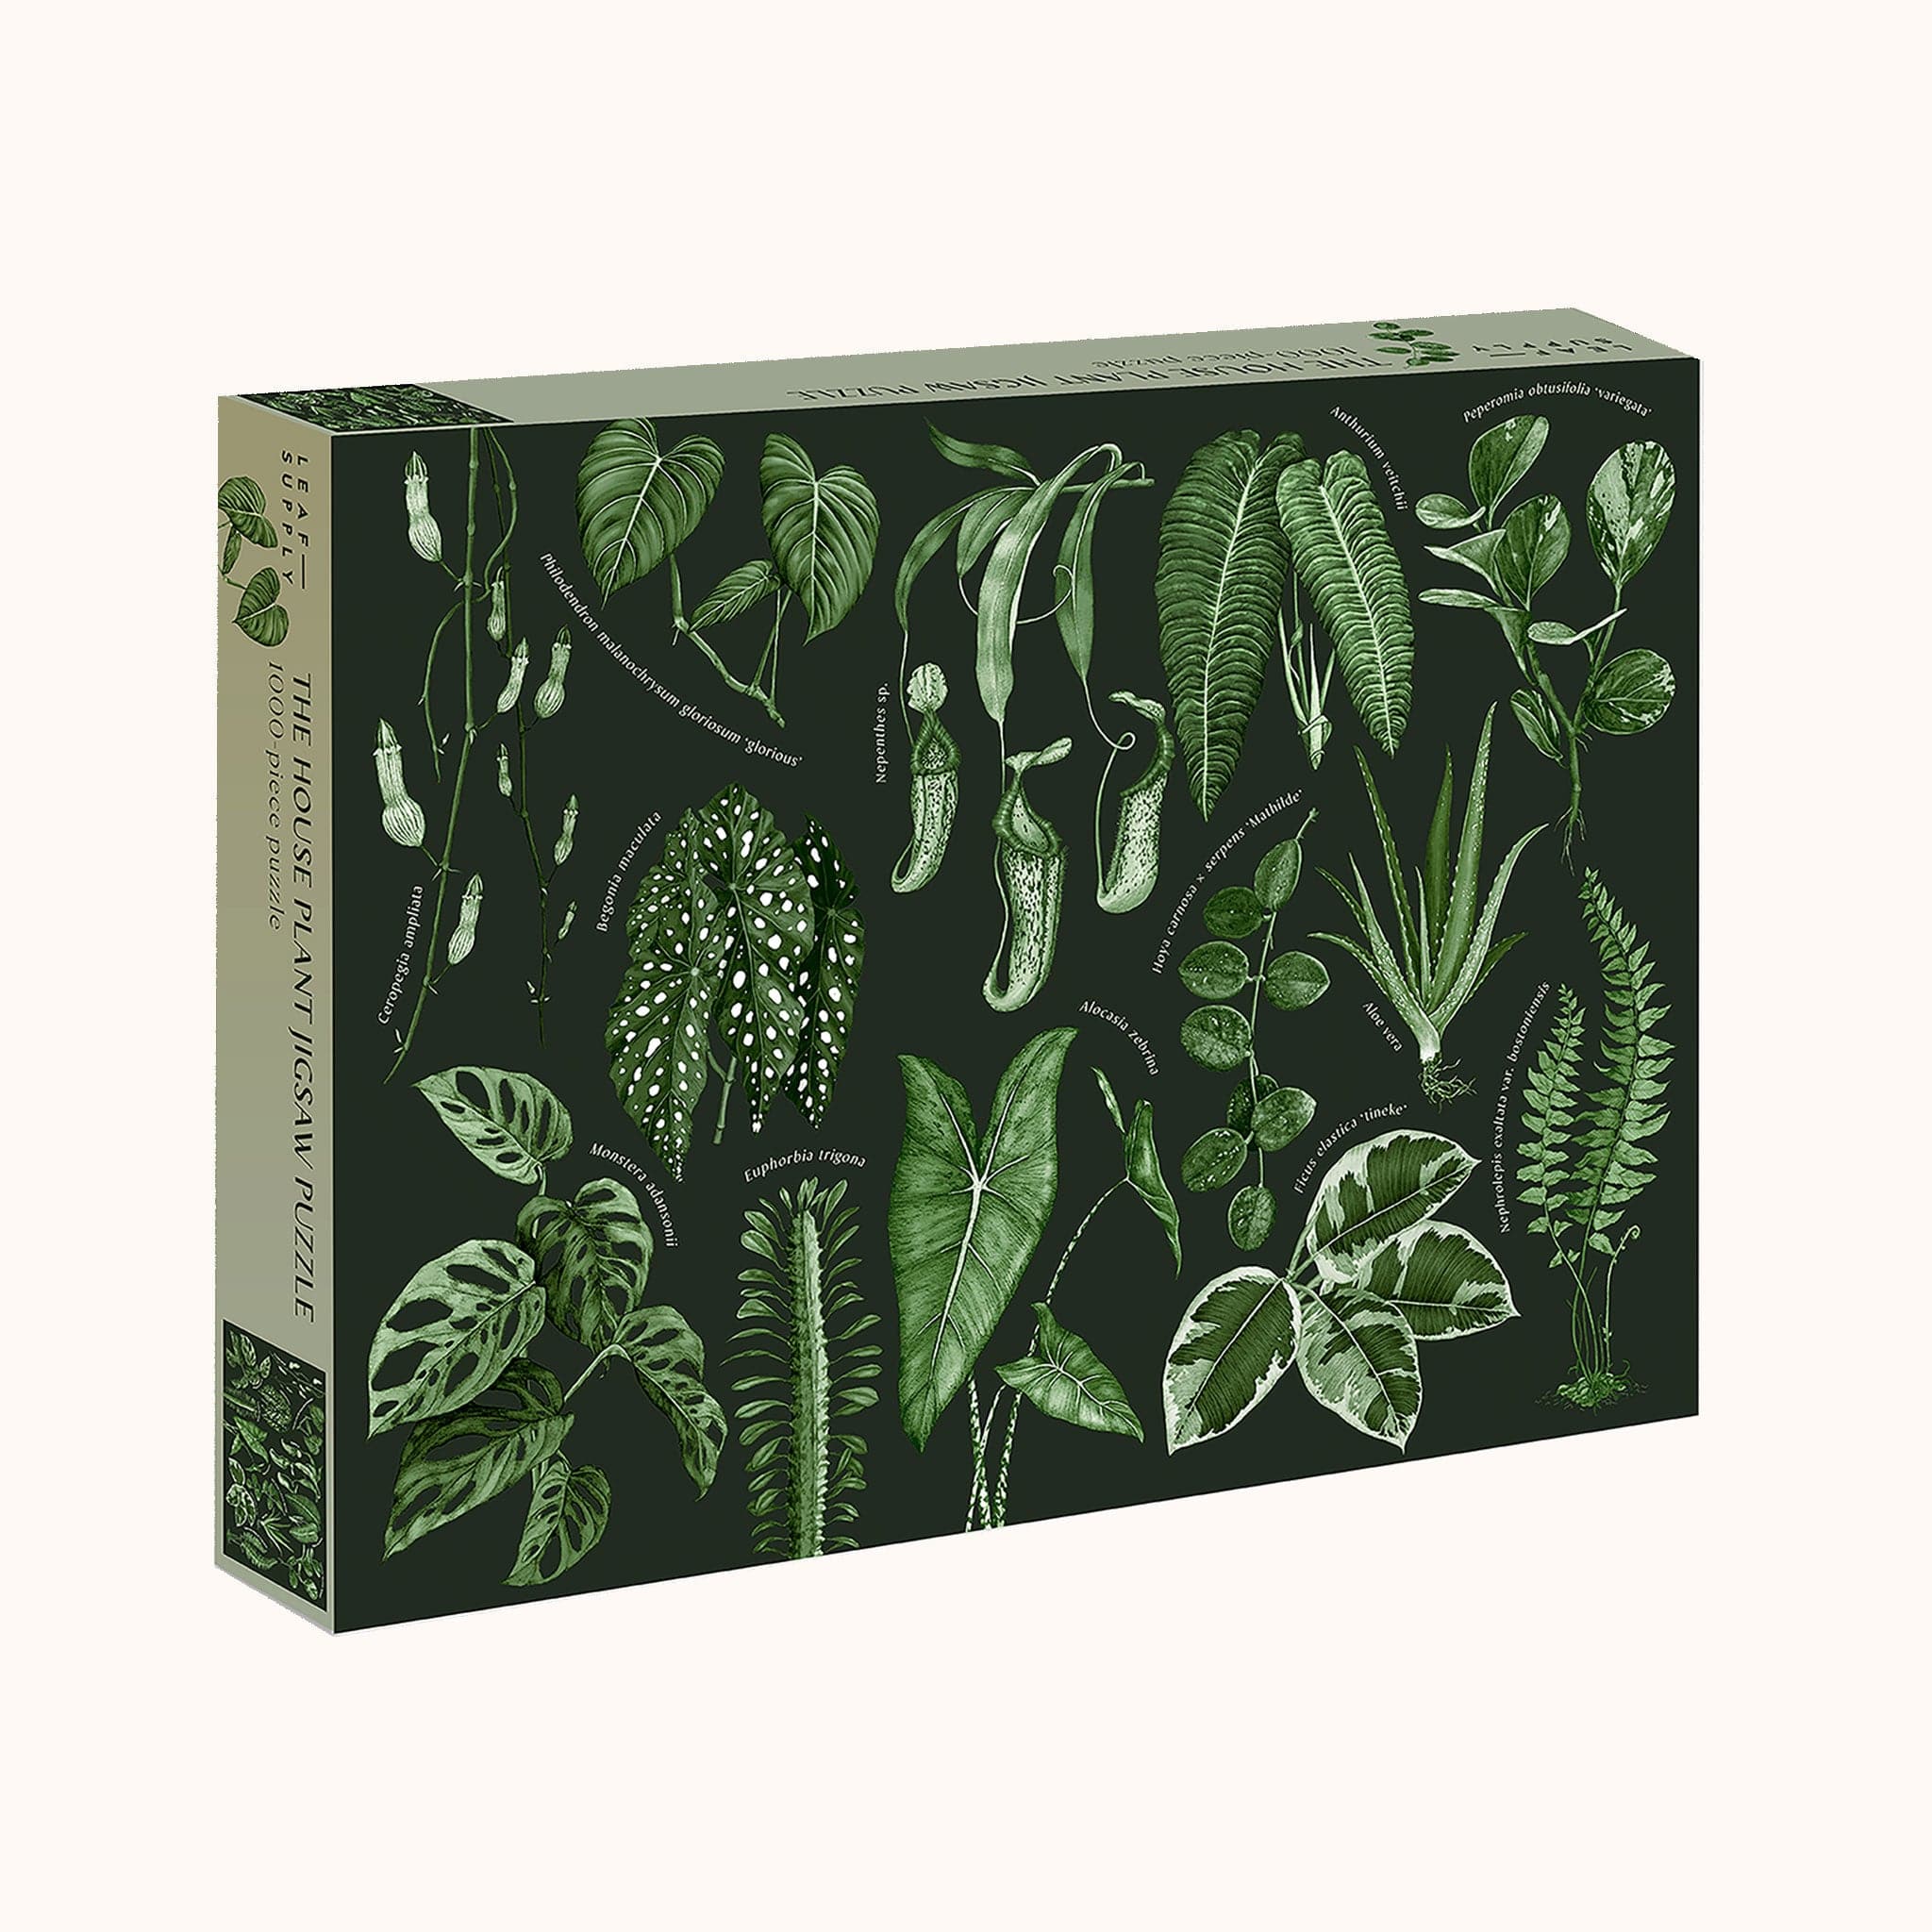 On a white background is a black puzzle box with an assortment of green house plant leaf illustrations on the front cover..